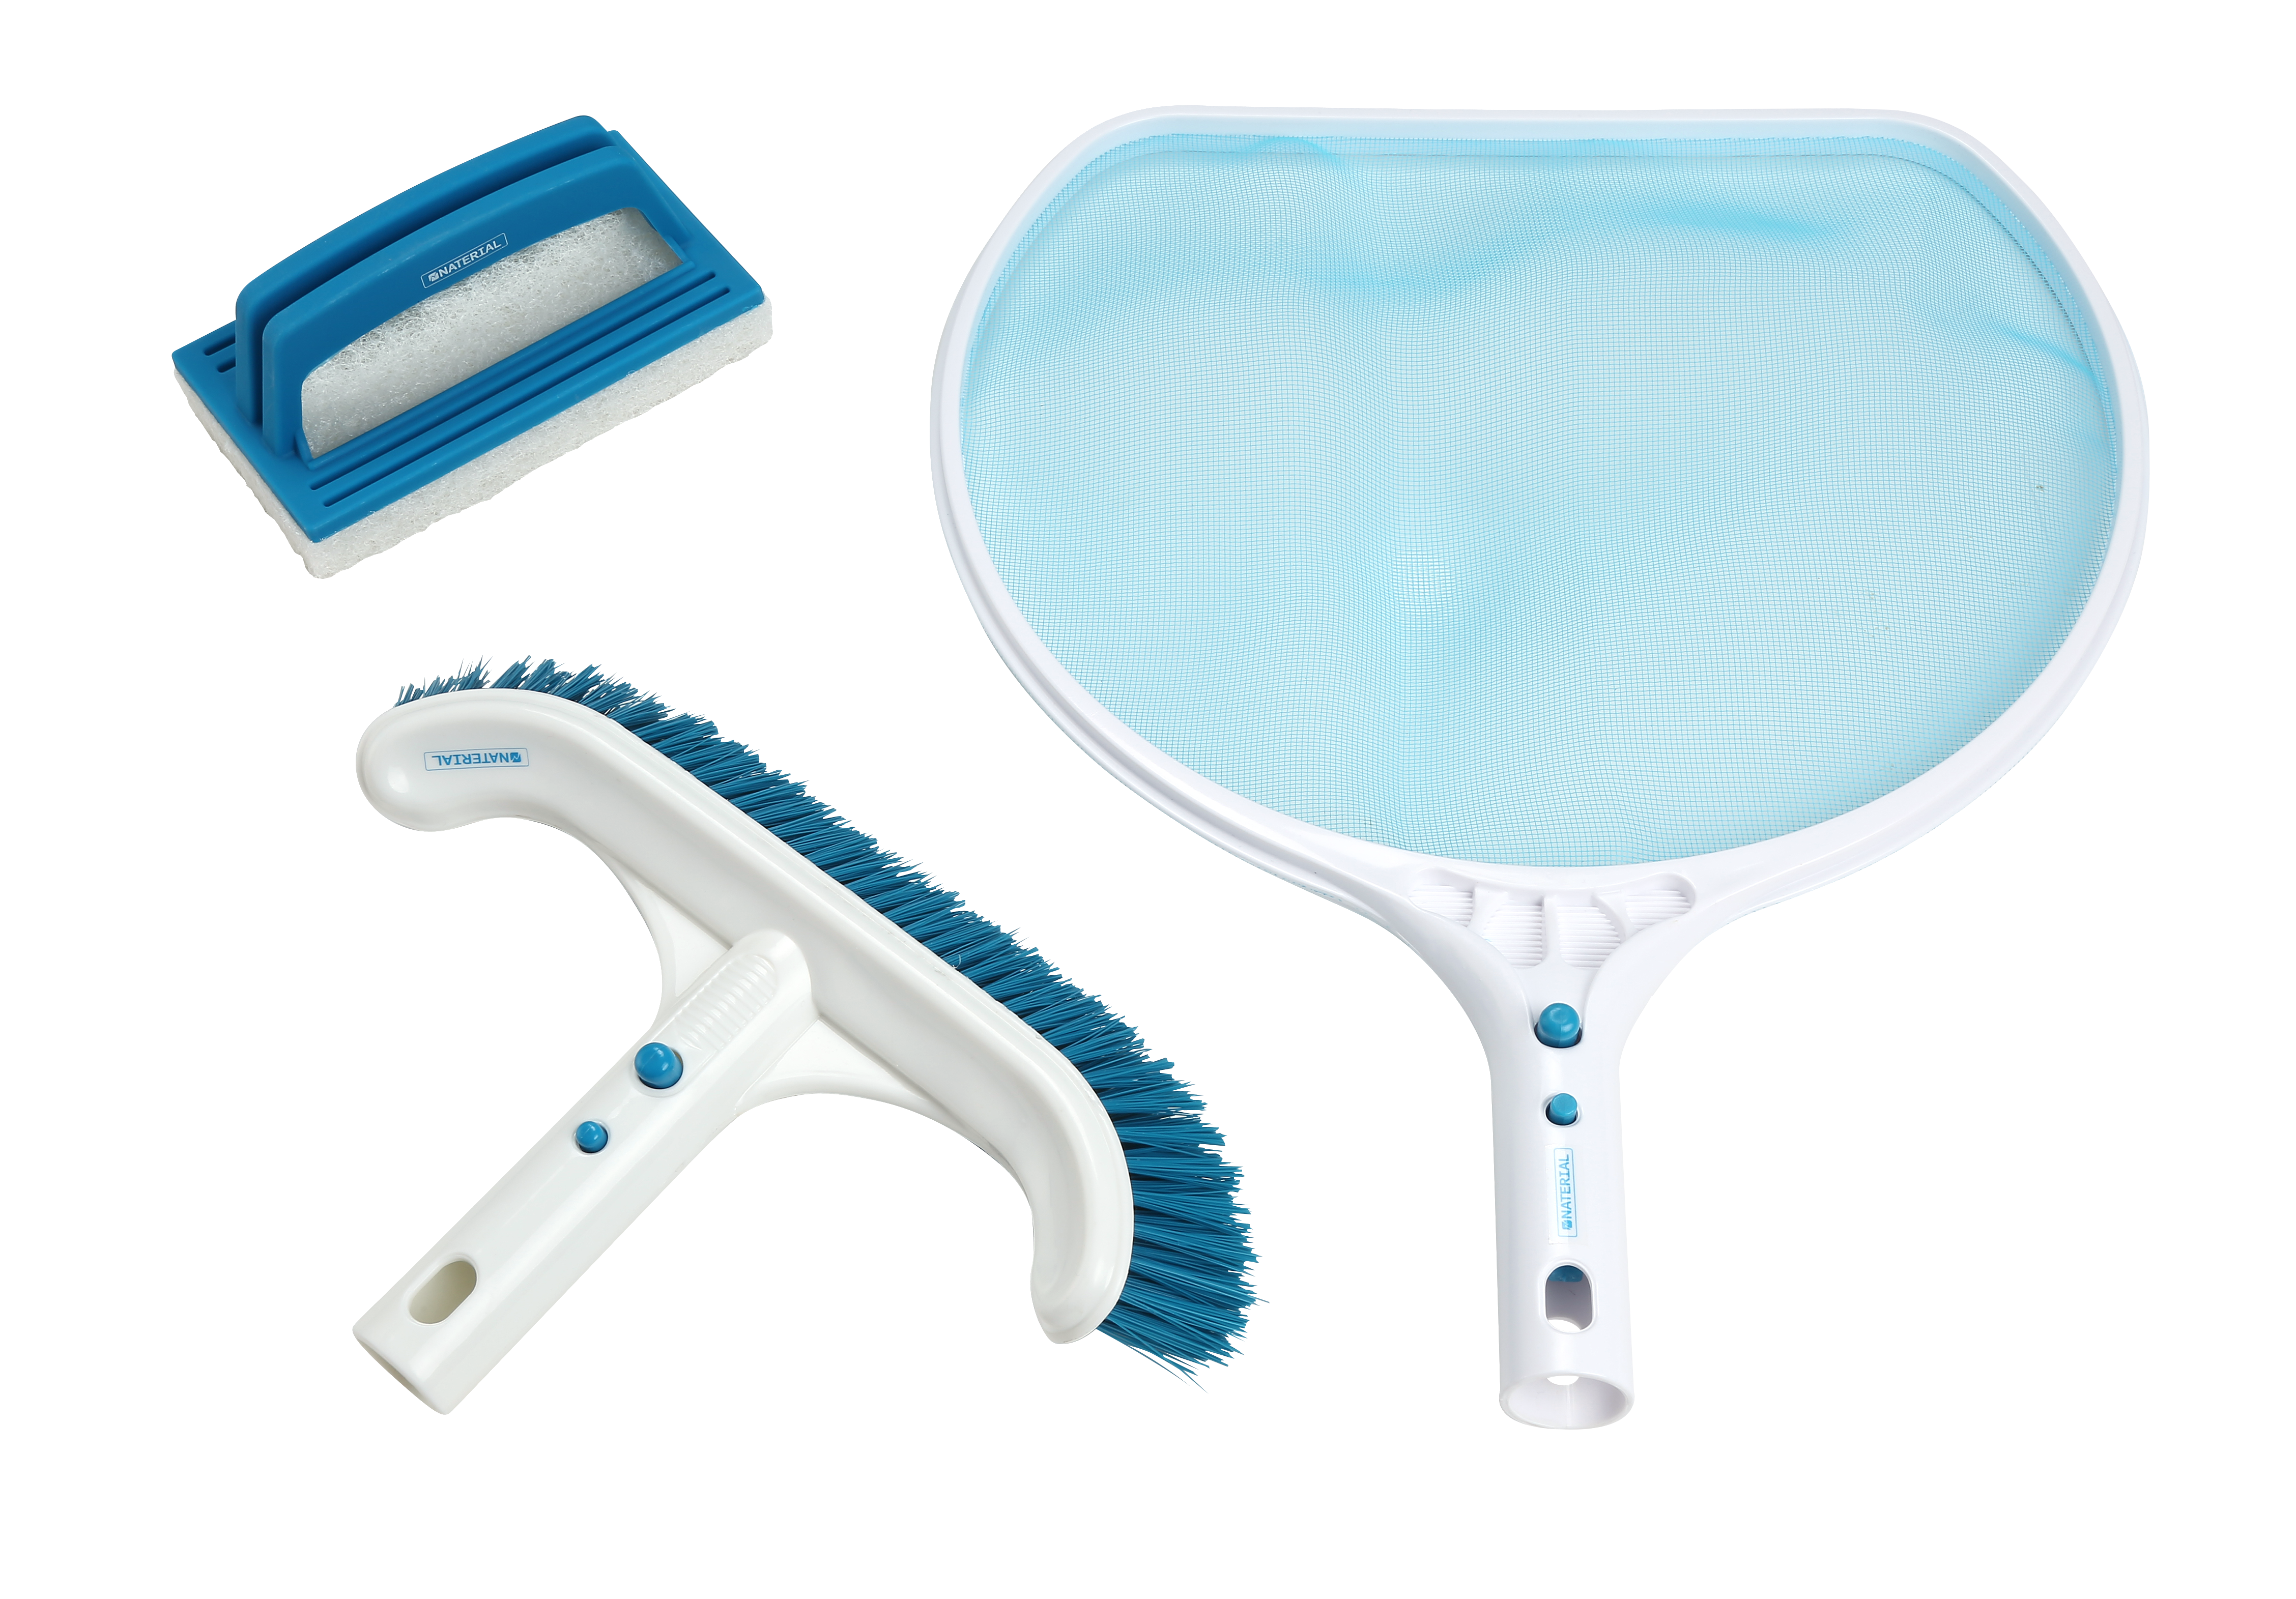 Kit mantenimiento para spa naterial inflable